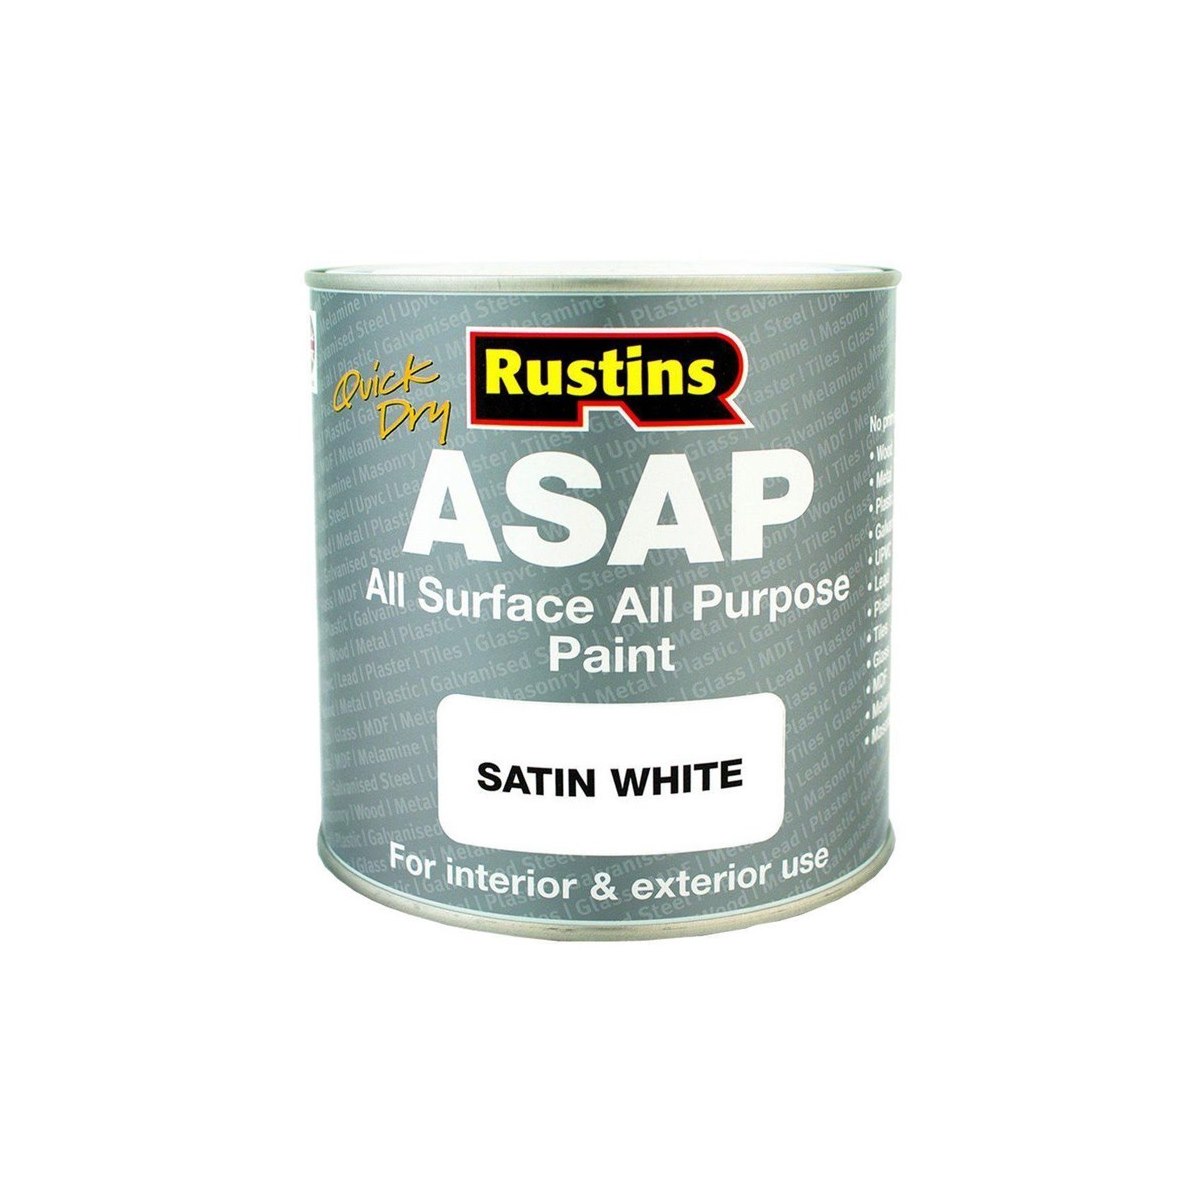 Rustins Quick Dry All Surface All Purpose Paint (ASAP) White 1 Litre